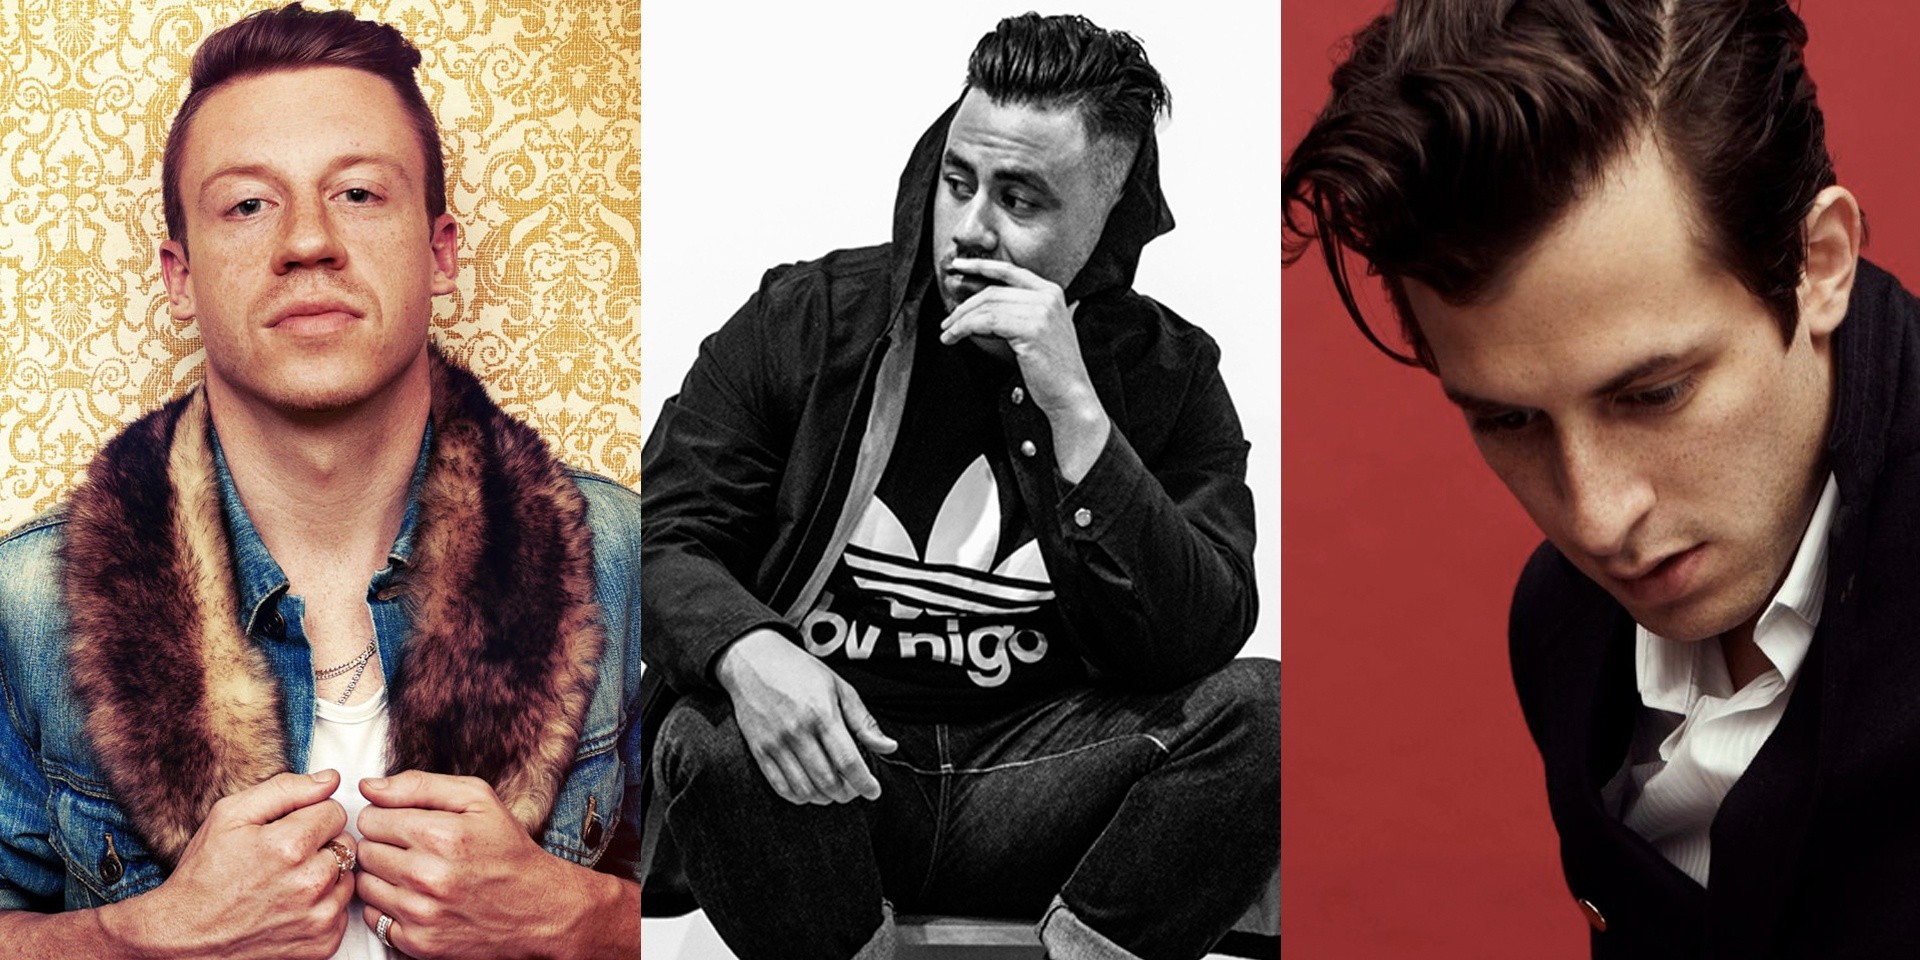 Macklemore & Ryan Lewis, Ta-Ku, Mark Ronson are all coming to Asia